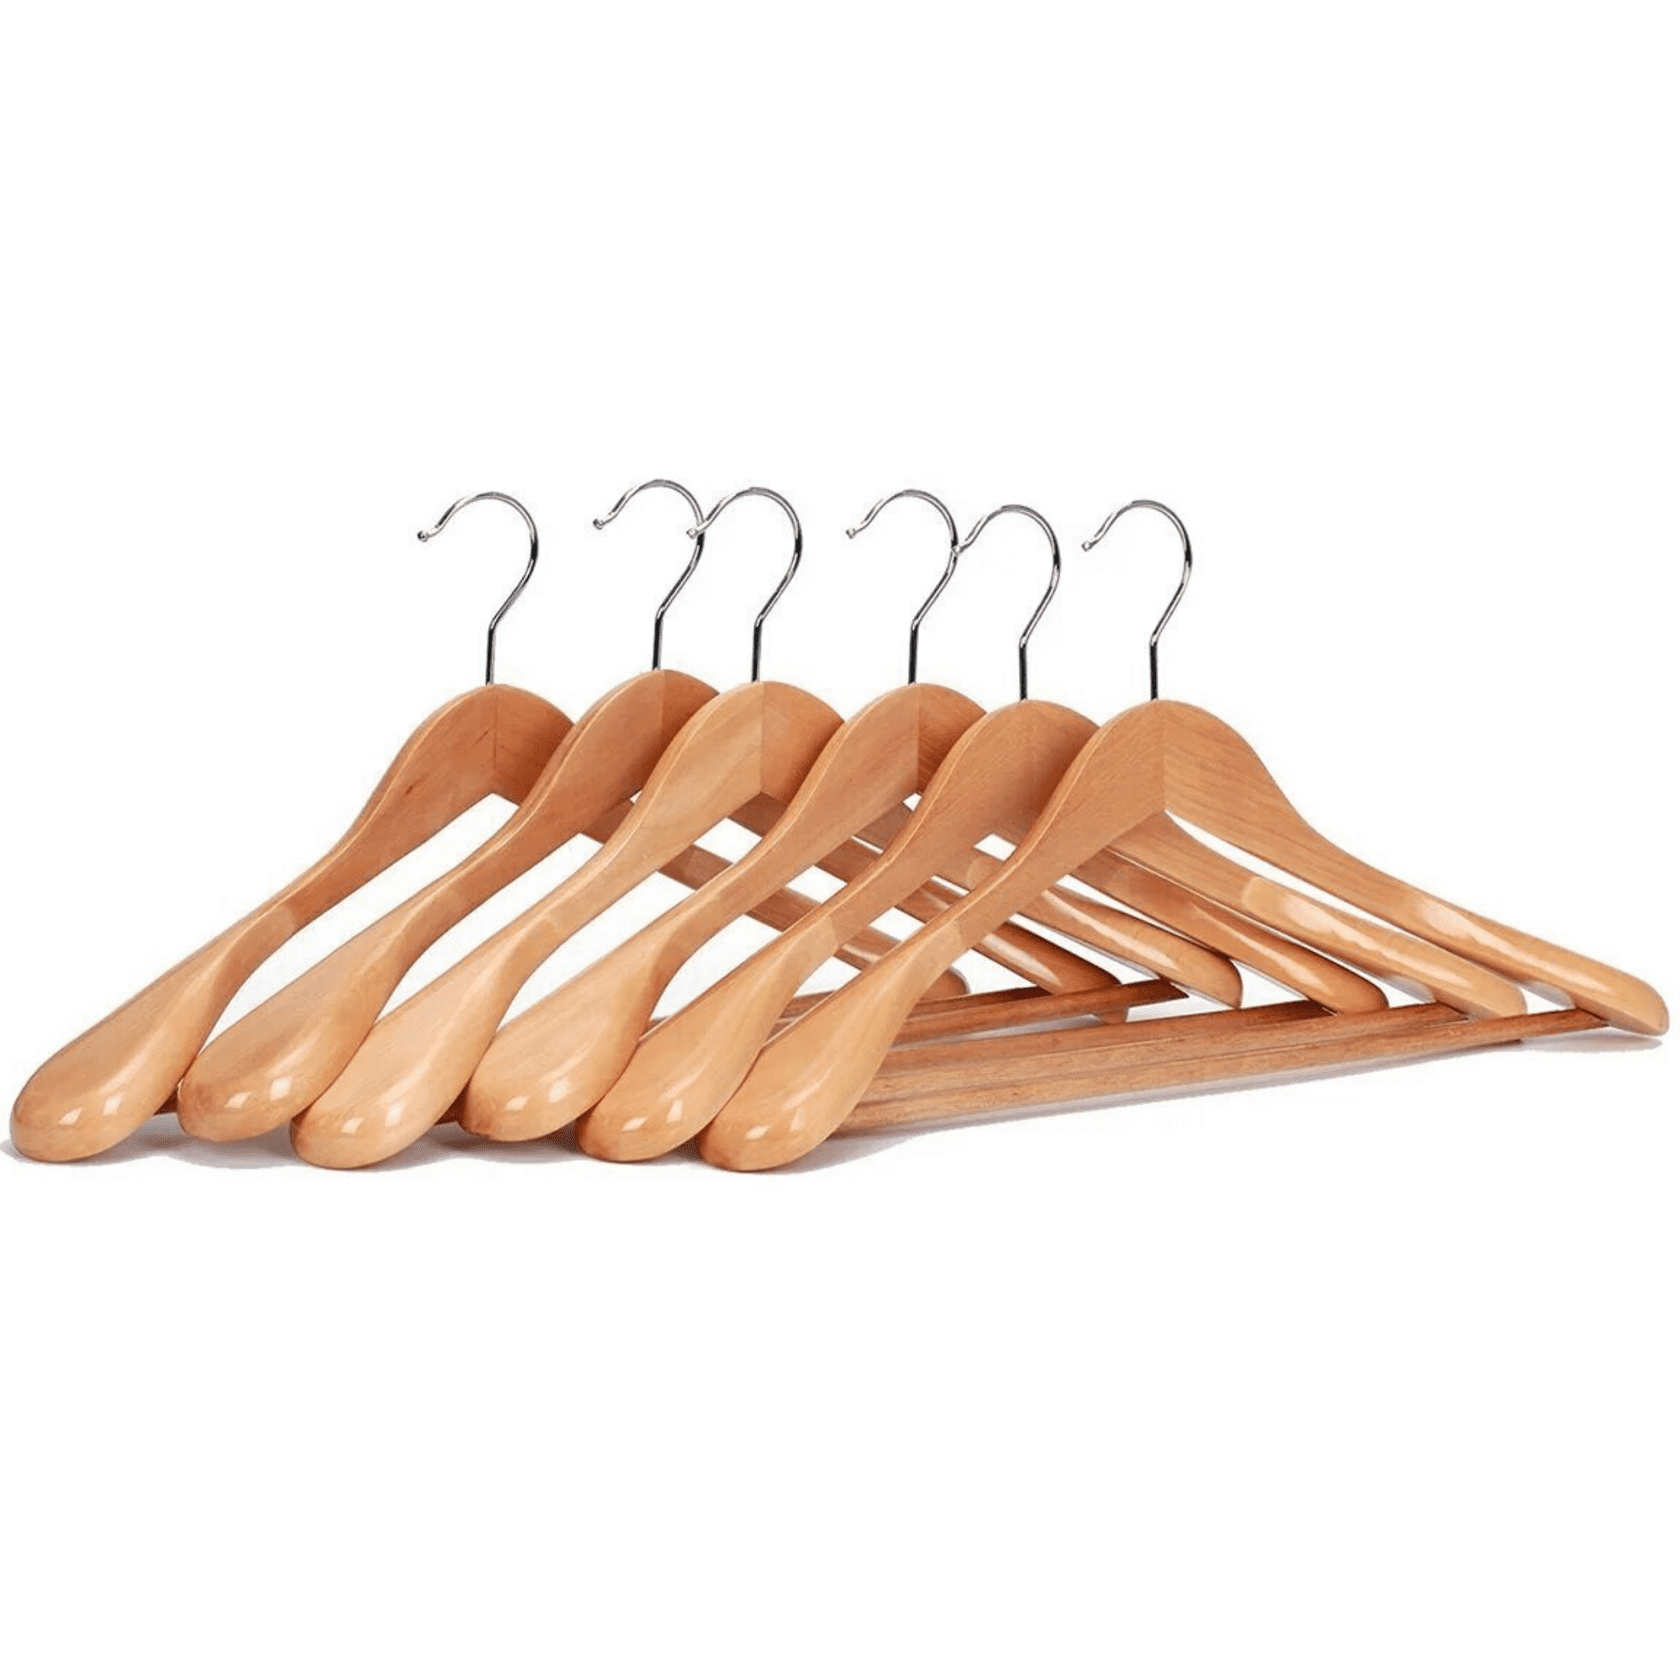 The Hanger Store 4 Wooden Suit Hangers With Broad Ends and Non-Slip Trouser Bar 